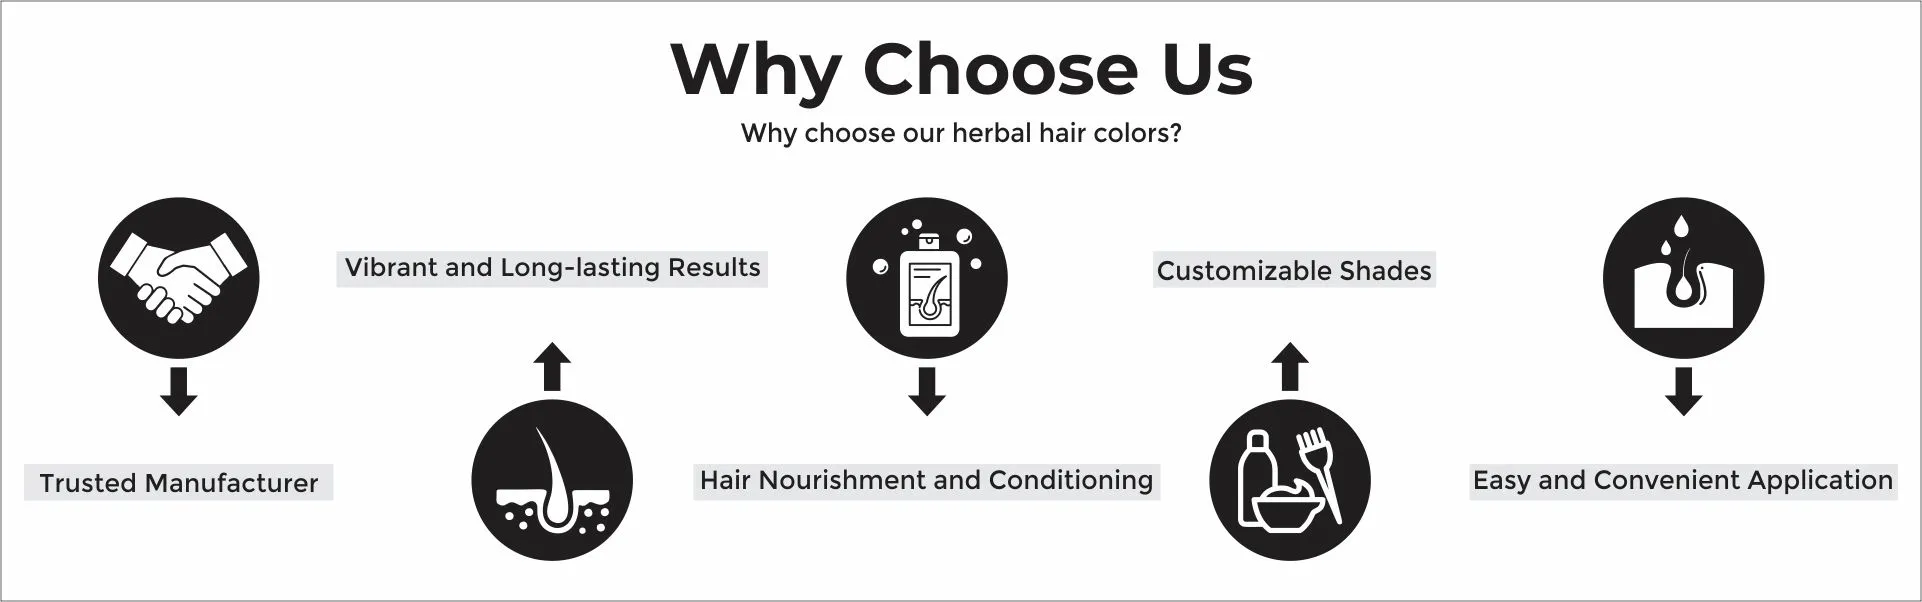 why choose our herbal hair colors - www.dkihenna.com